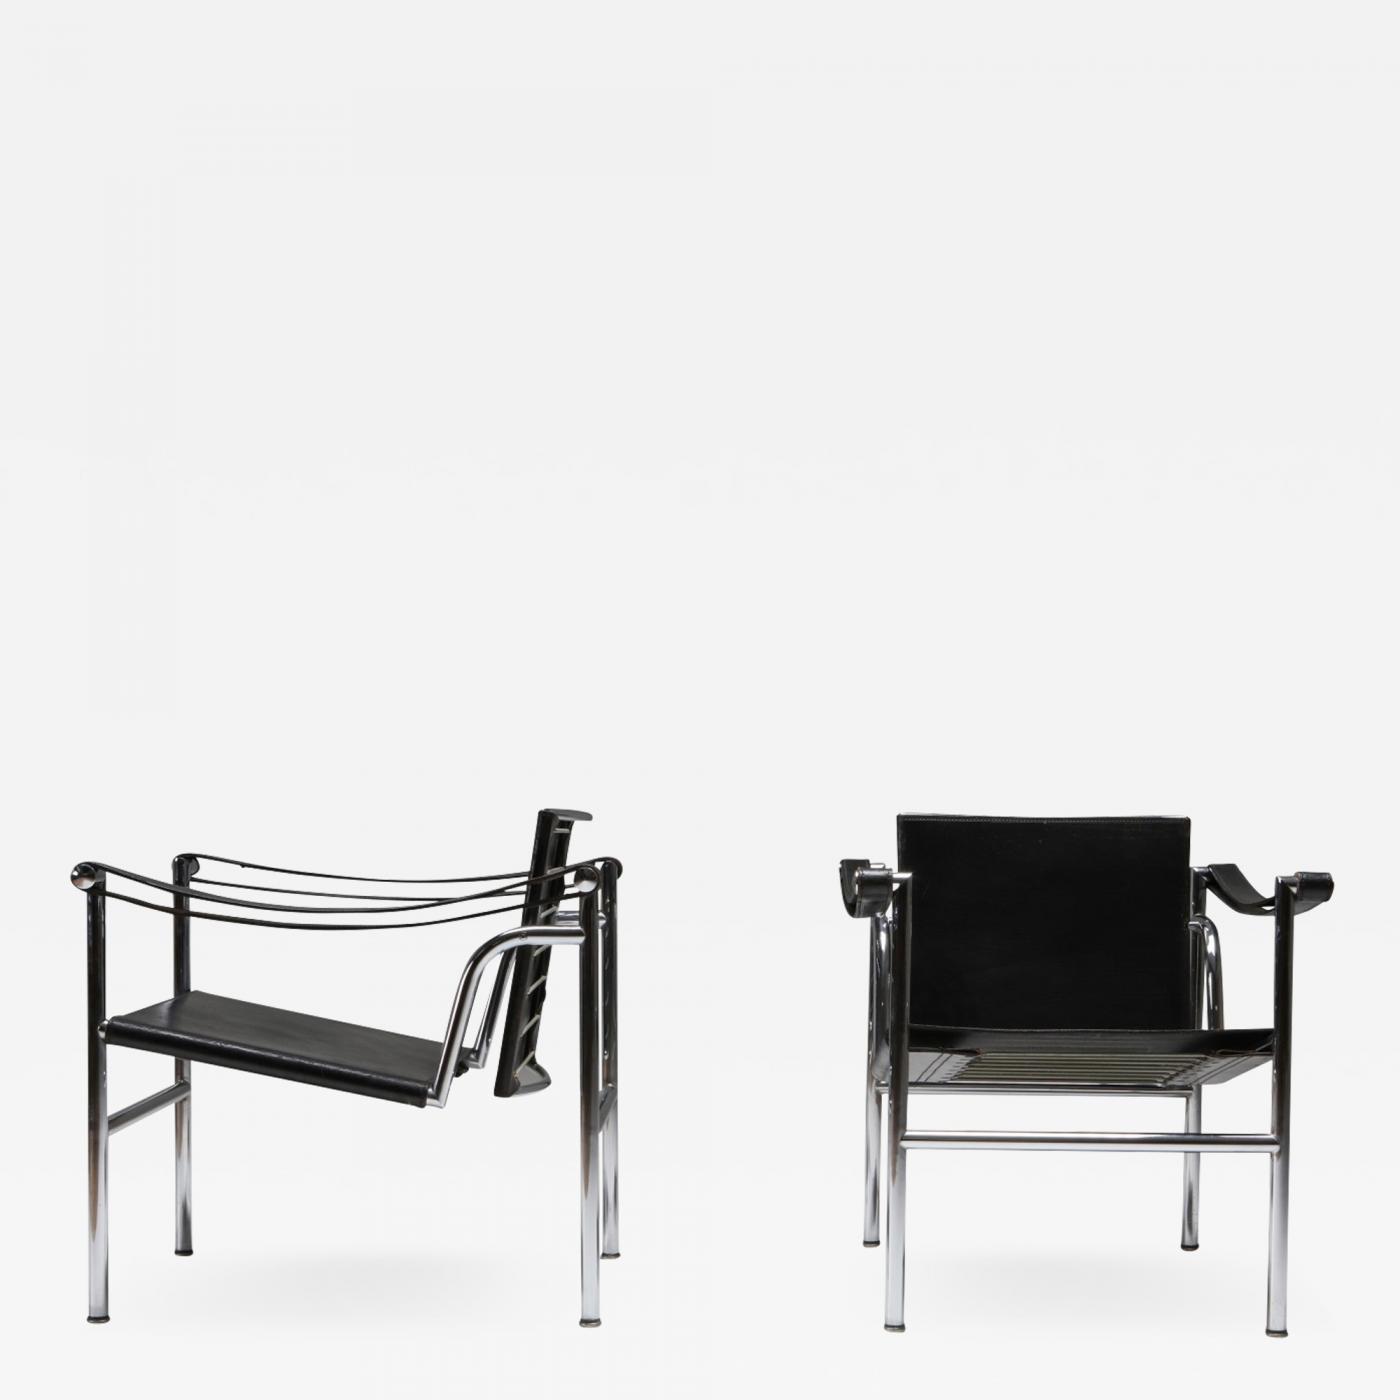 Le Corbusier, Charlotte Perriand & Pierre Jeanneret - Designer furniture by